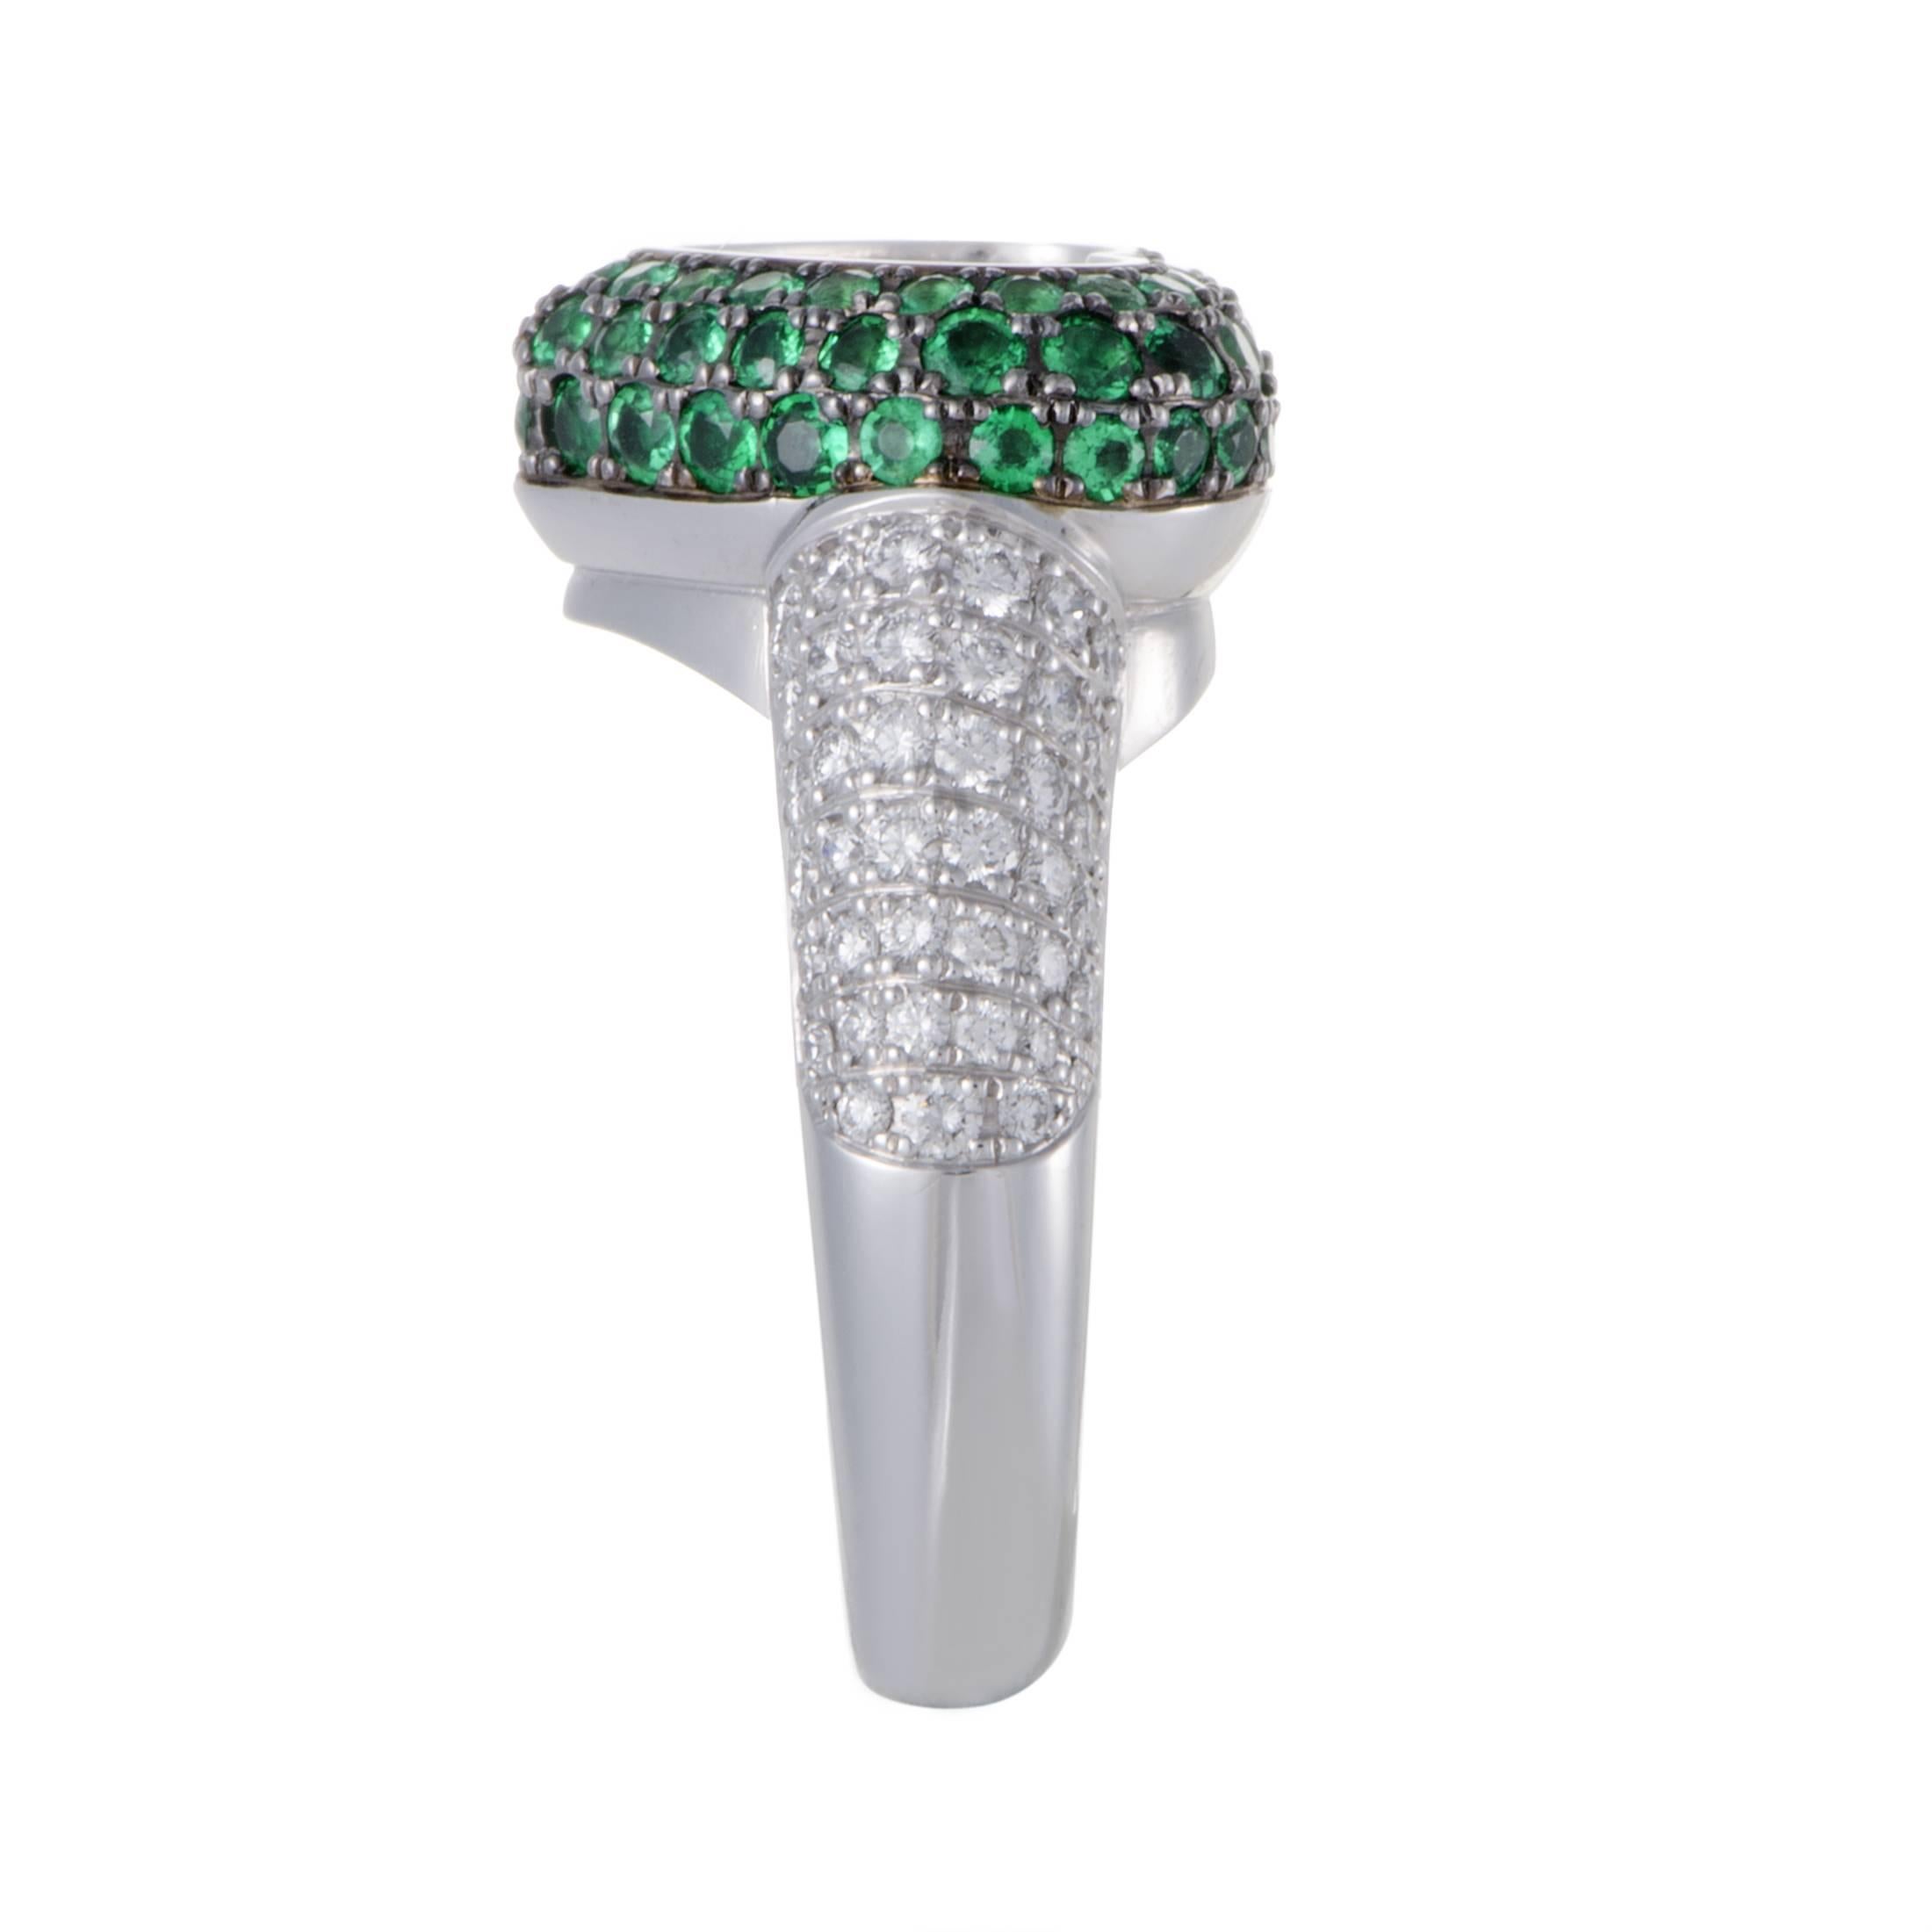 Lavishly embellished with a precious blend of emeralds weighing in total 1.40 carats and resplendent diamonds amounting to 0.79ct, this majestic heart-shaped 18K white gold ring form Chopard is a brilliantly designed and expertly crafted item that